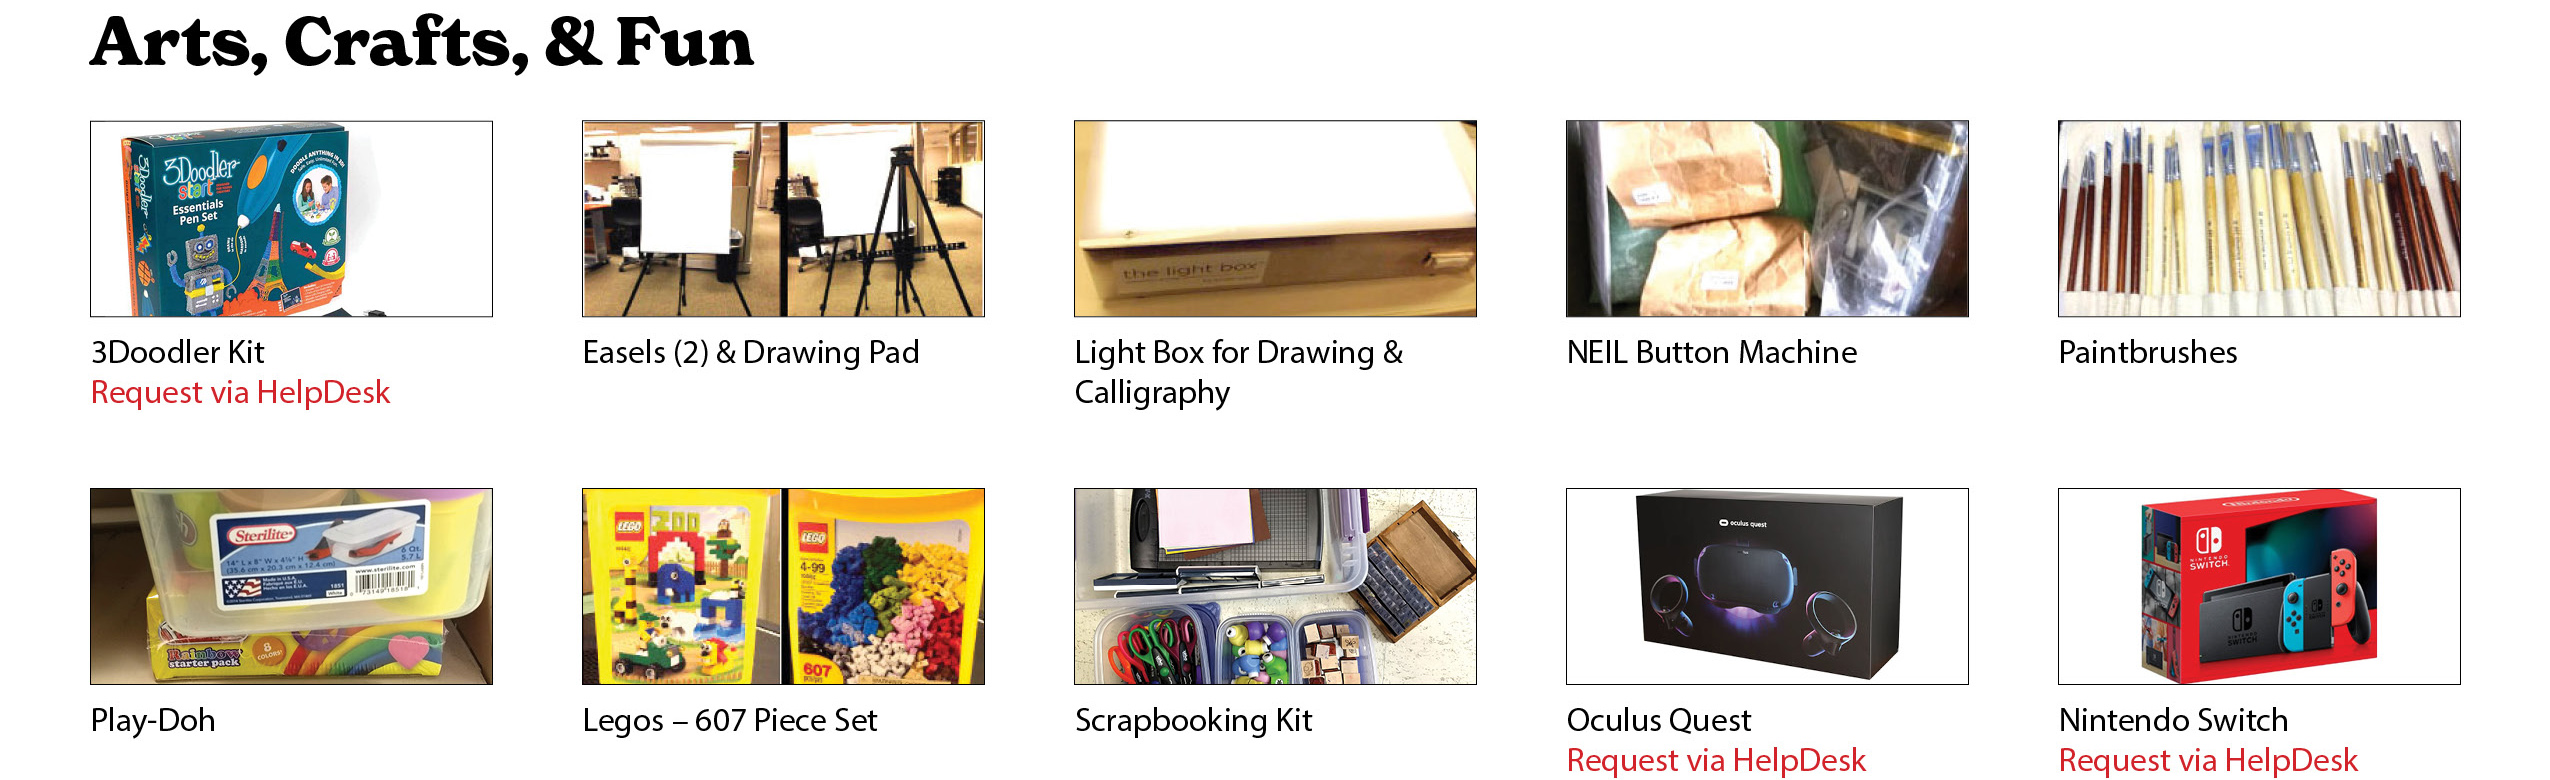 Catalog of PLLS' collection of arts, crafts, & fun co-op items.